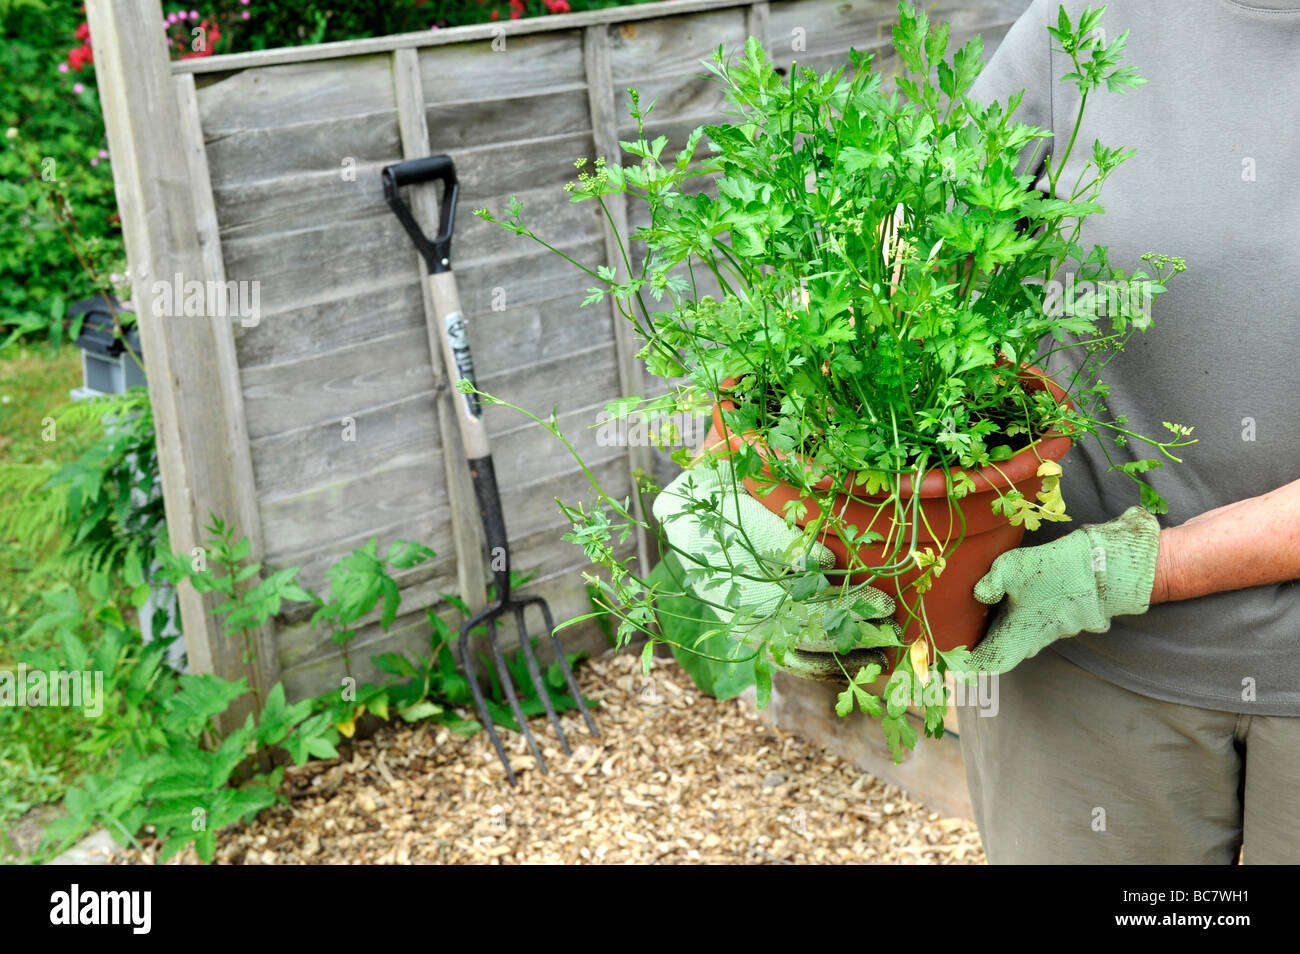 a gardener tends to raised beds full of home grown organic salad leaves and vegetables, pictured holding organic parsley plant Stock Photo